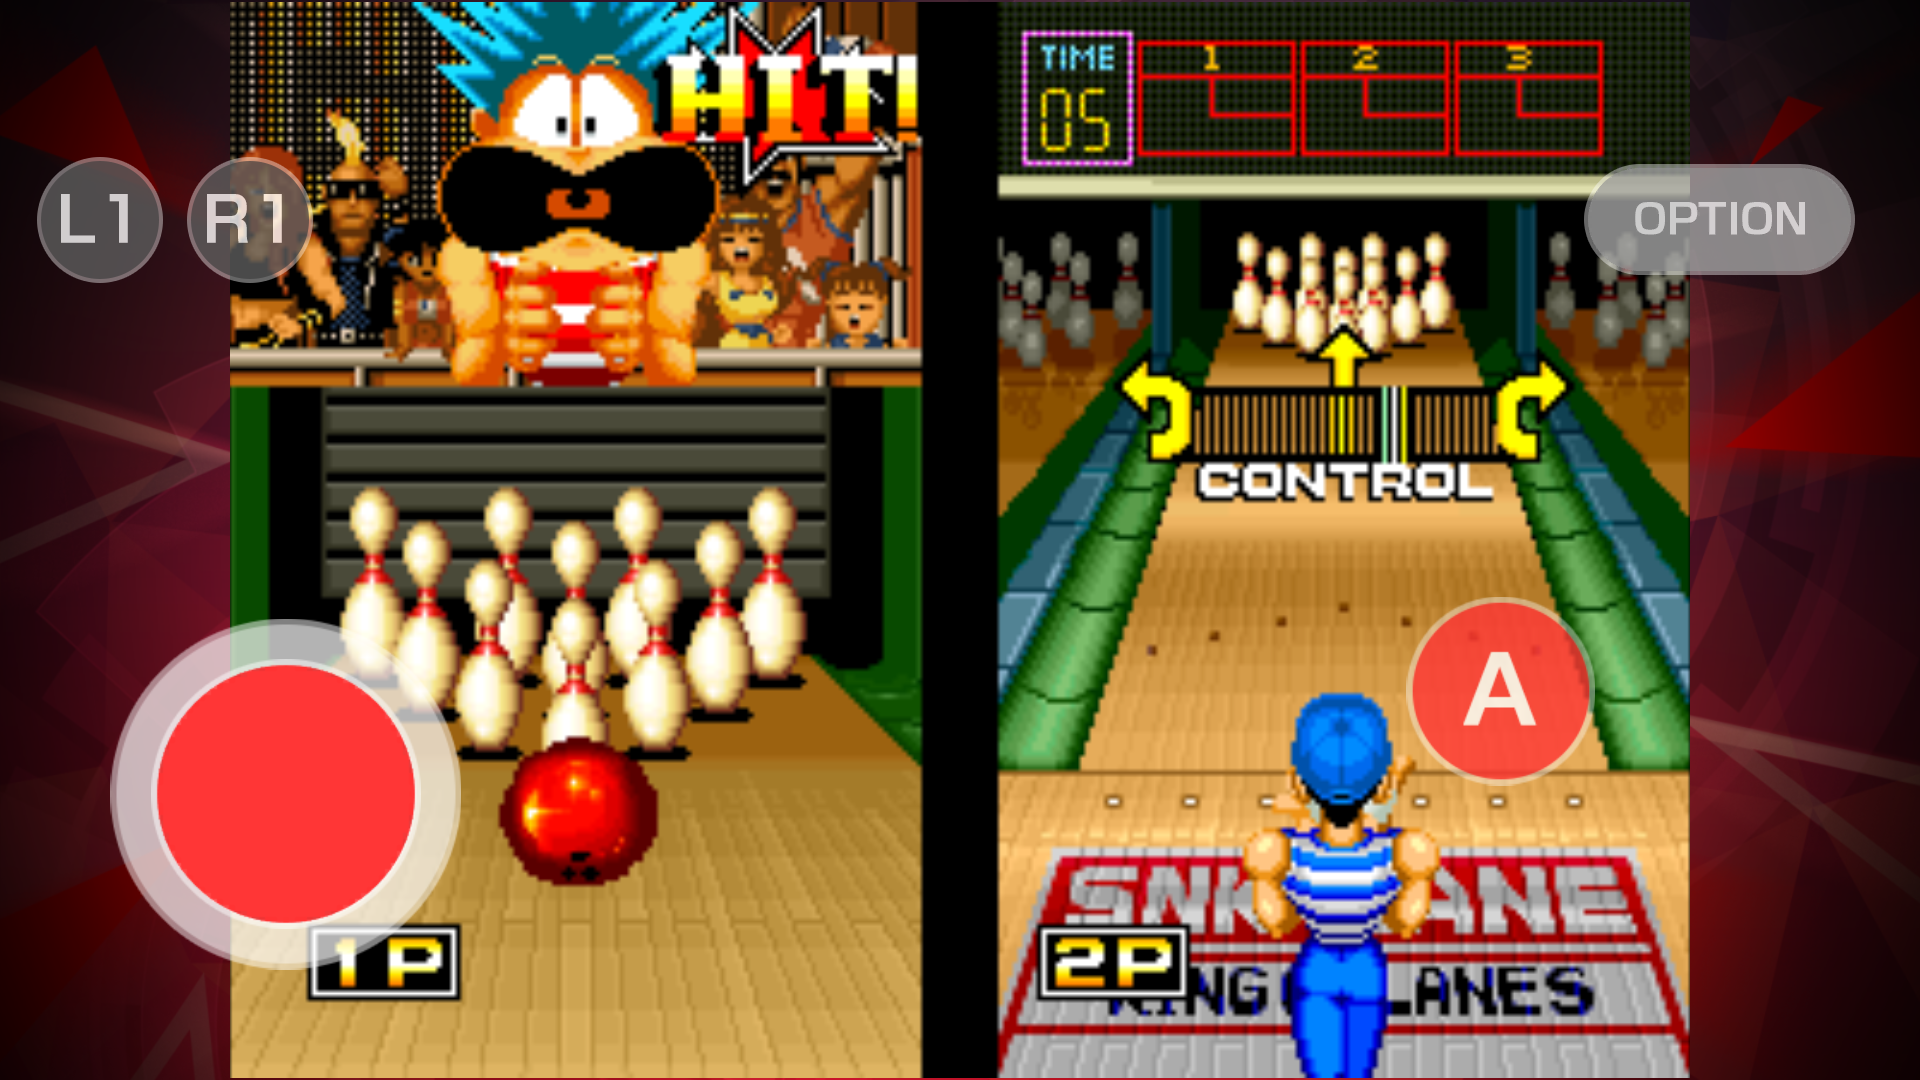 Bowling Game ‘League Bowling’ ACA NeoGeo From SNK and Hamster Is Out Now on iOS and Android